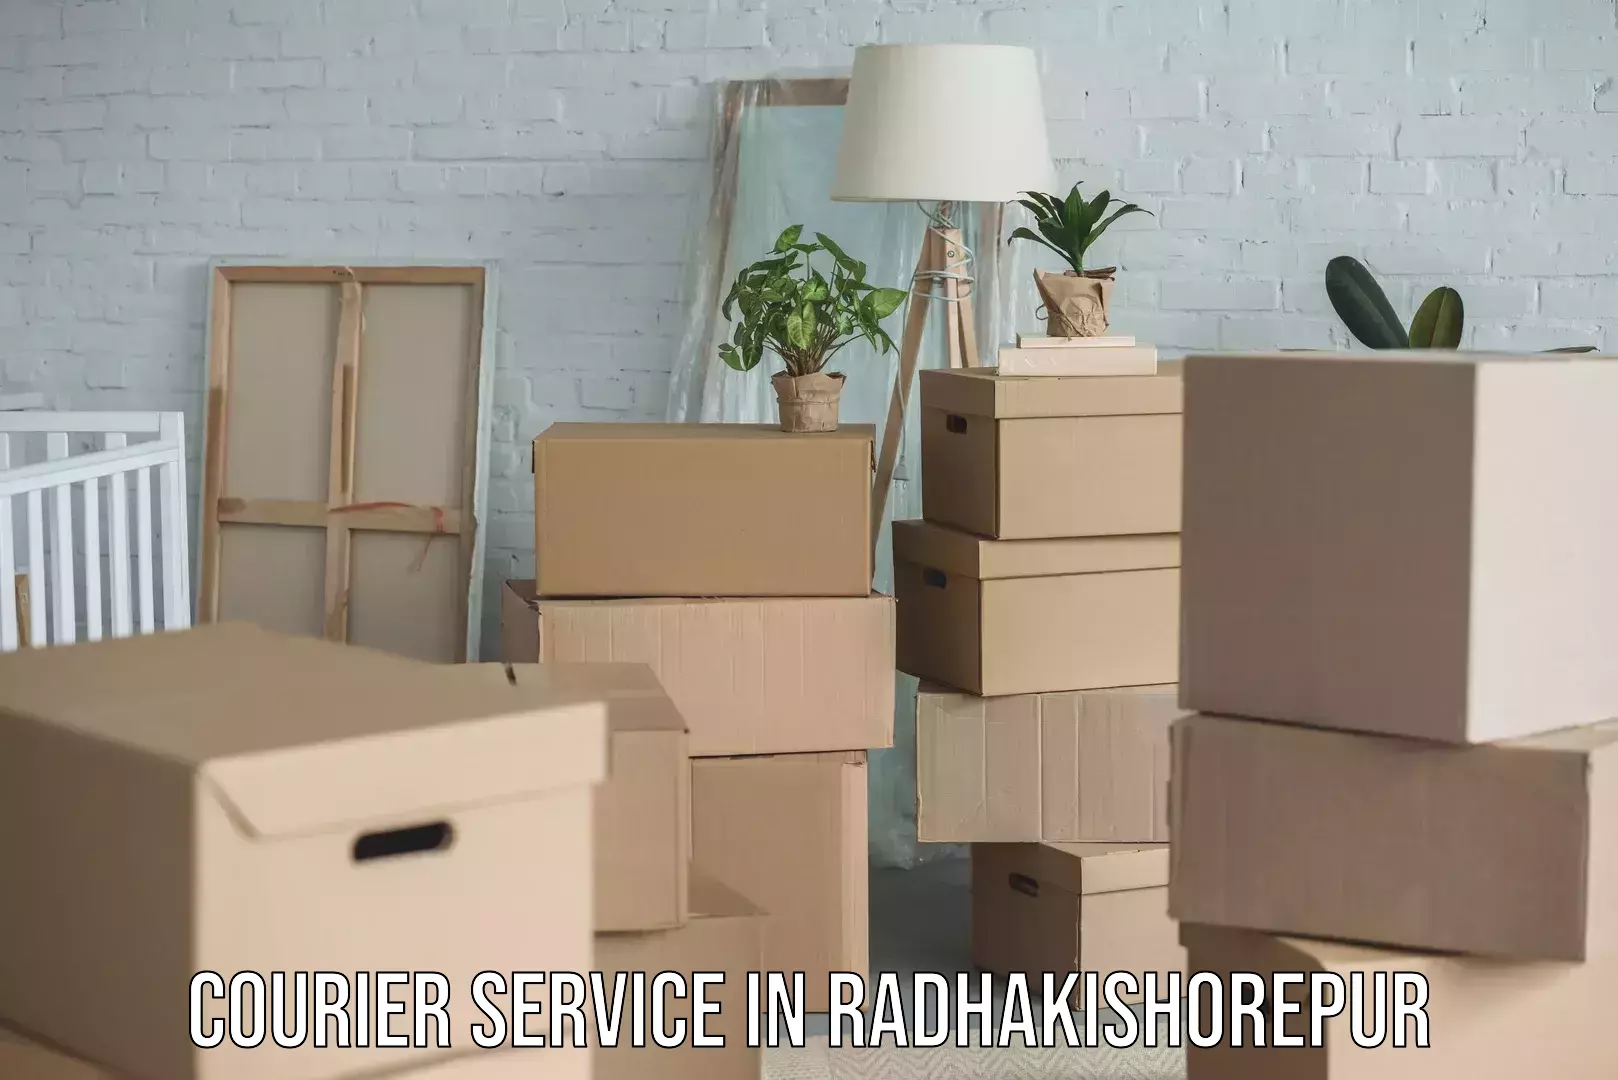 Full-service courier options in Radhakishorepur